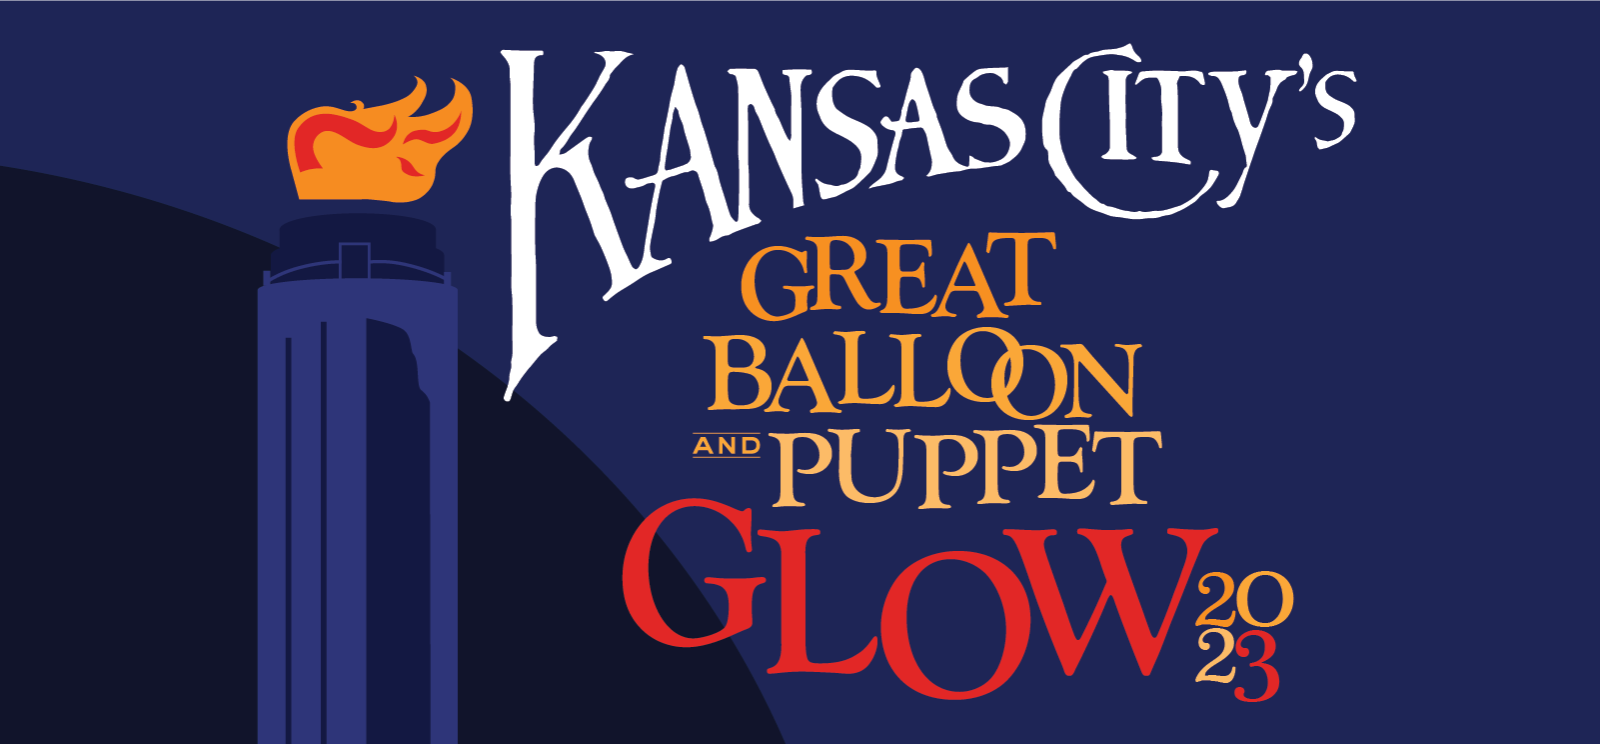 Image: Stylized blue graphic of the Liberty Memorial Tower with an orange flame on top. Text: Kansas City's Great Balloon and Puppet Glow 2023